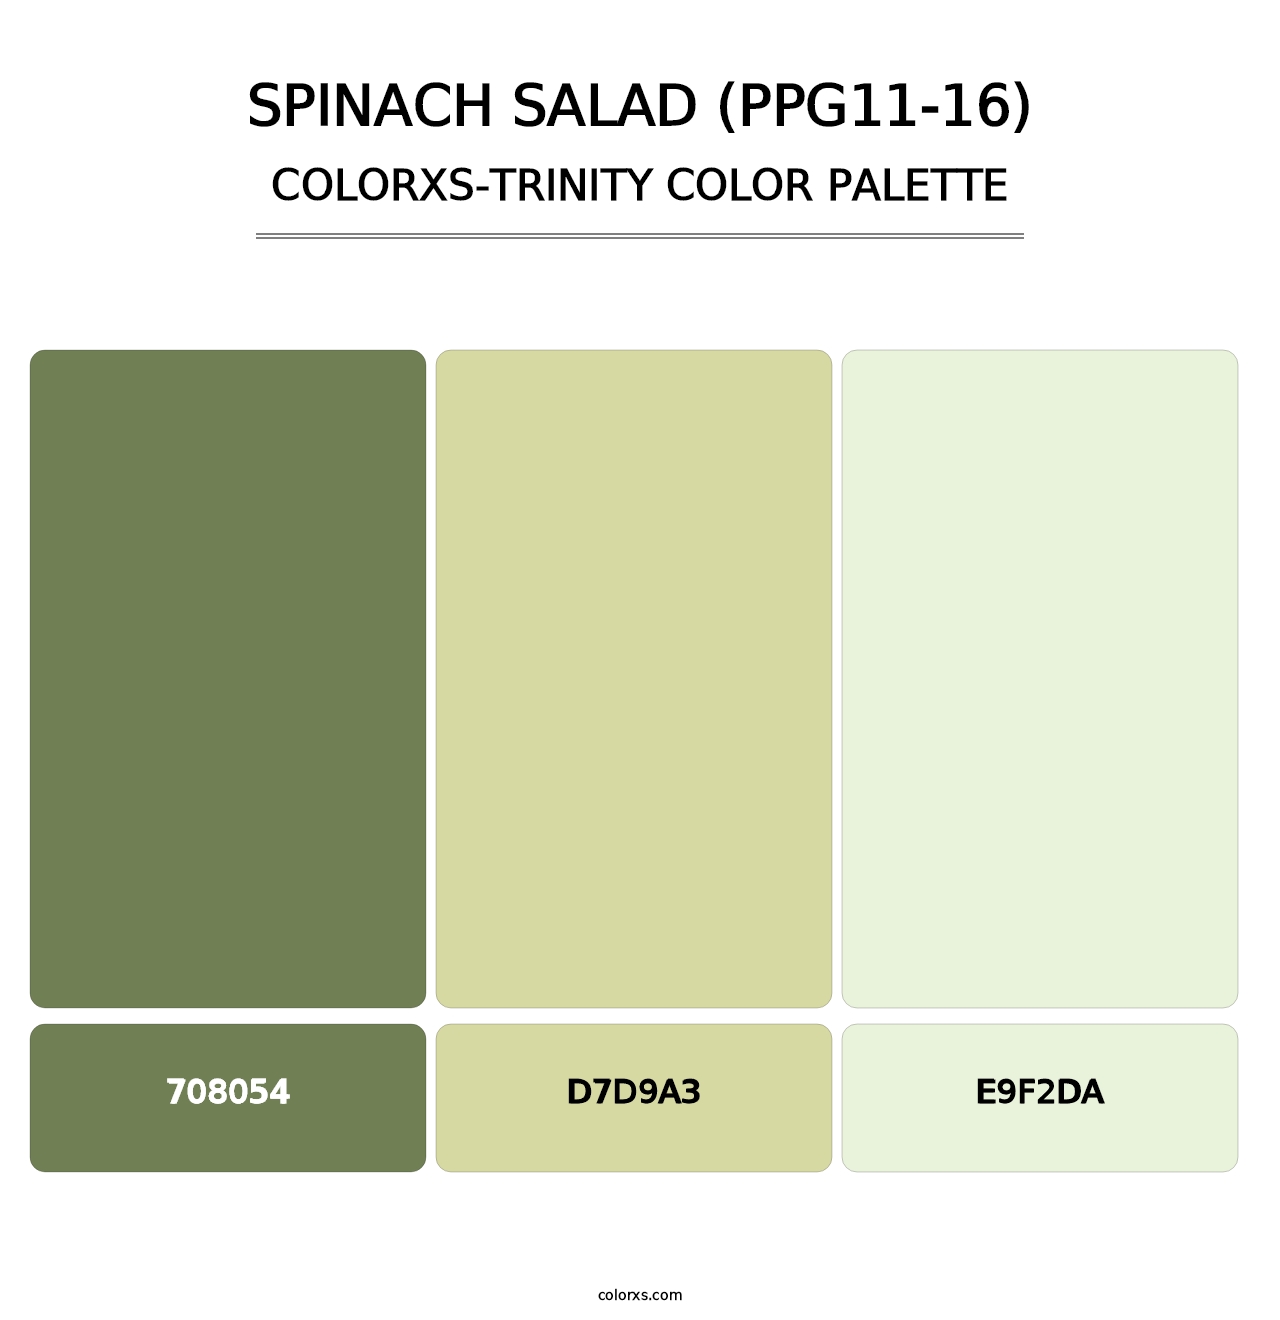 Spinach Salad (PPG11-16) - Colorxs Trinity Palette